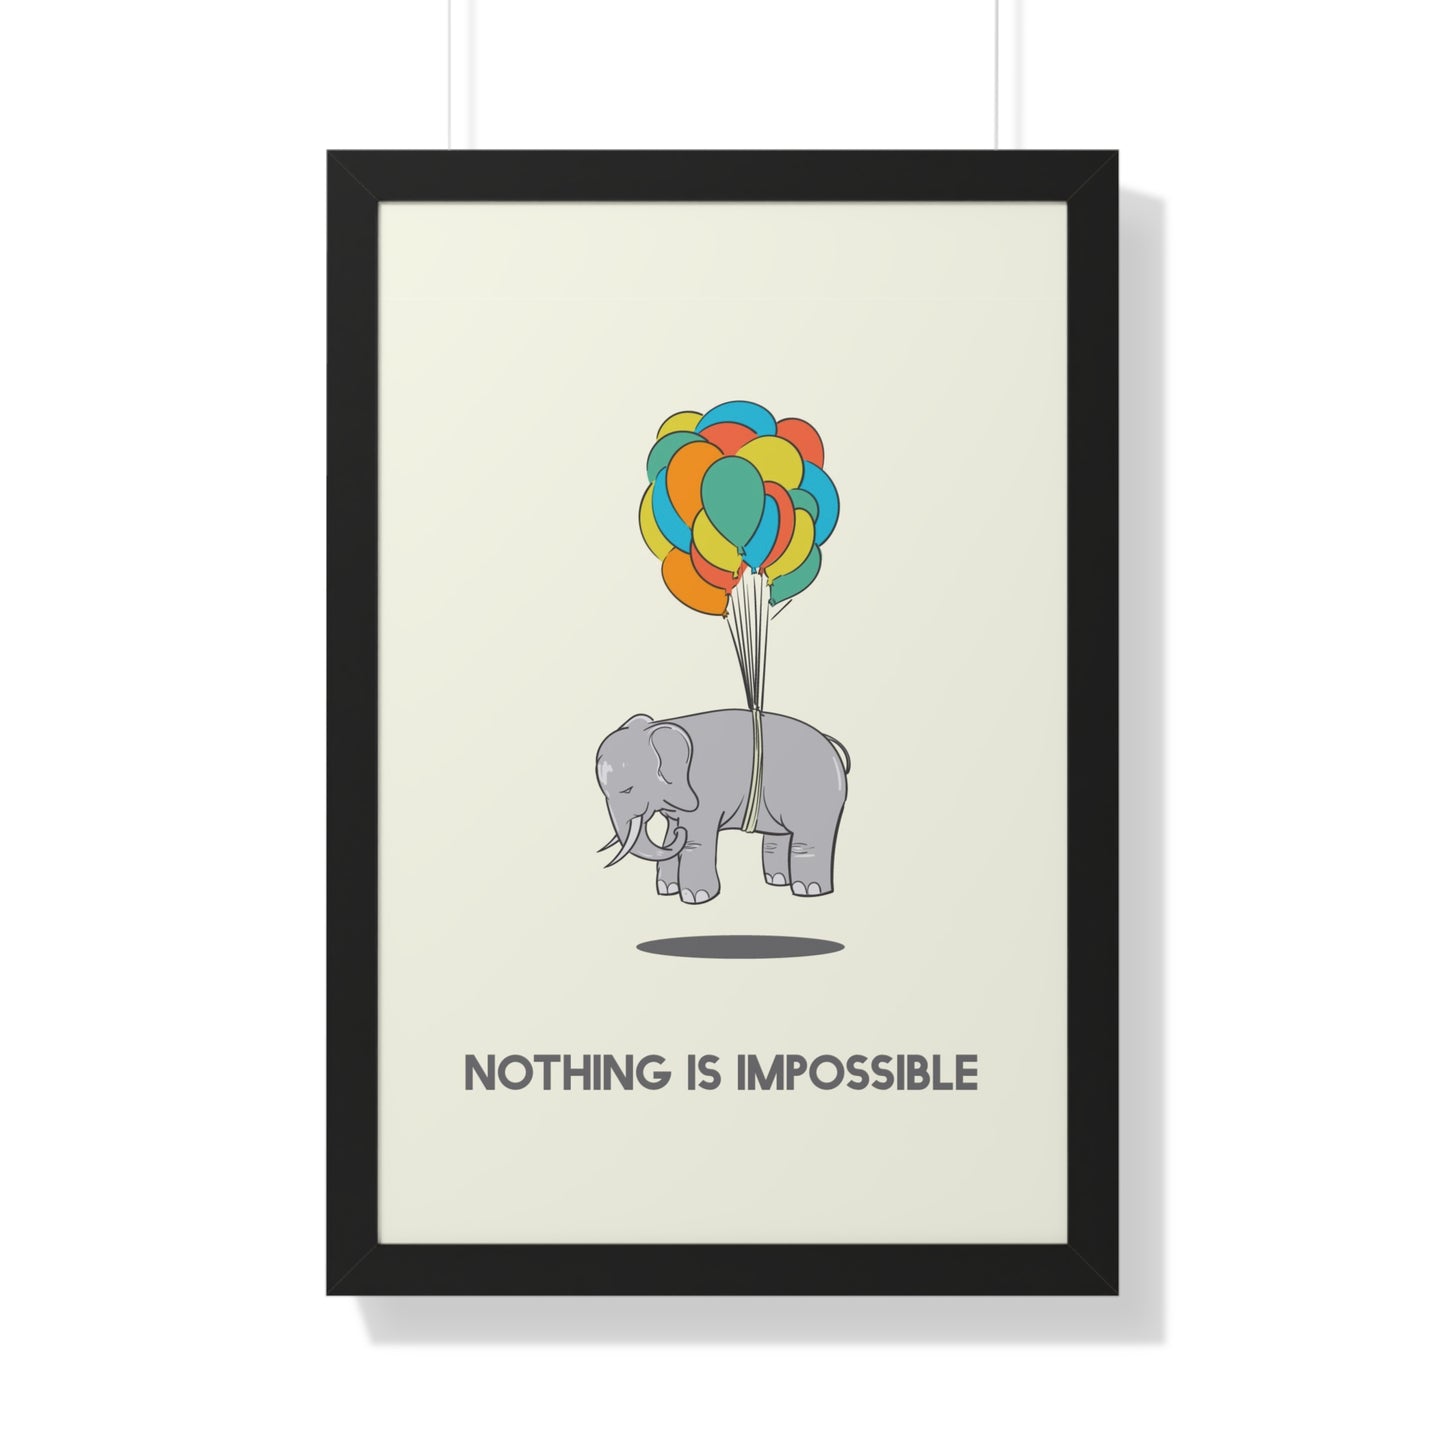 Nothing is Impossible Poster Frame